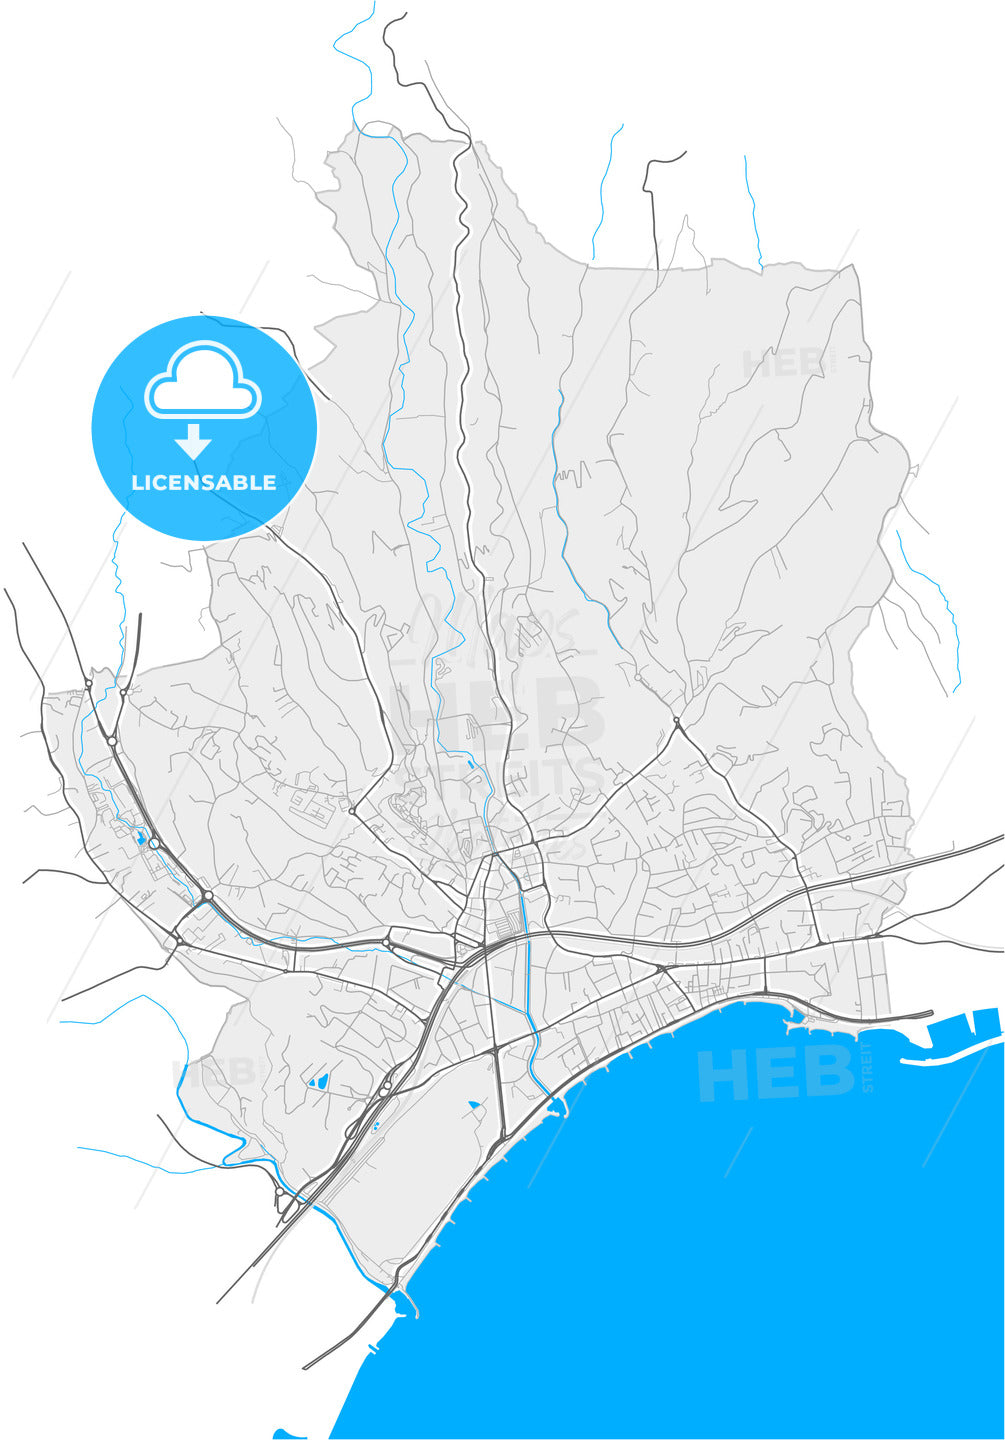 Cagnes-sur-Mer, Alpes-Maritimes, France, high quality vector map